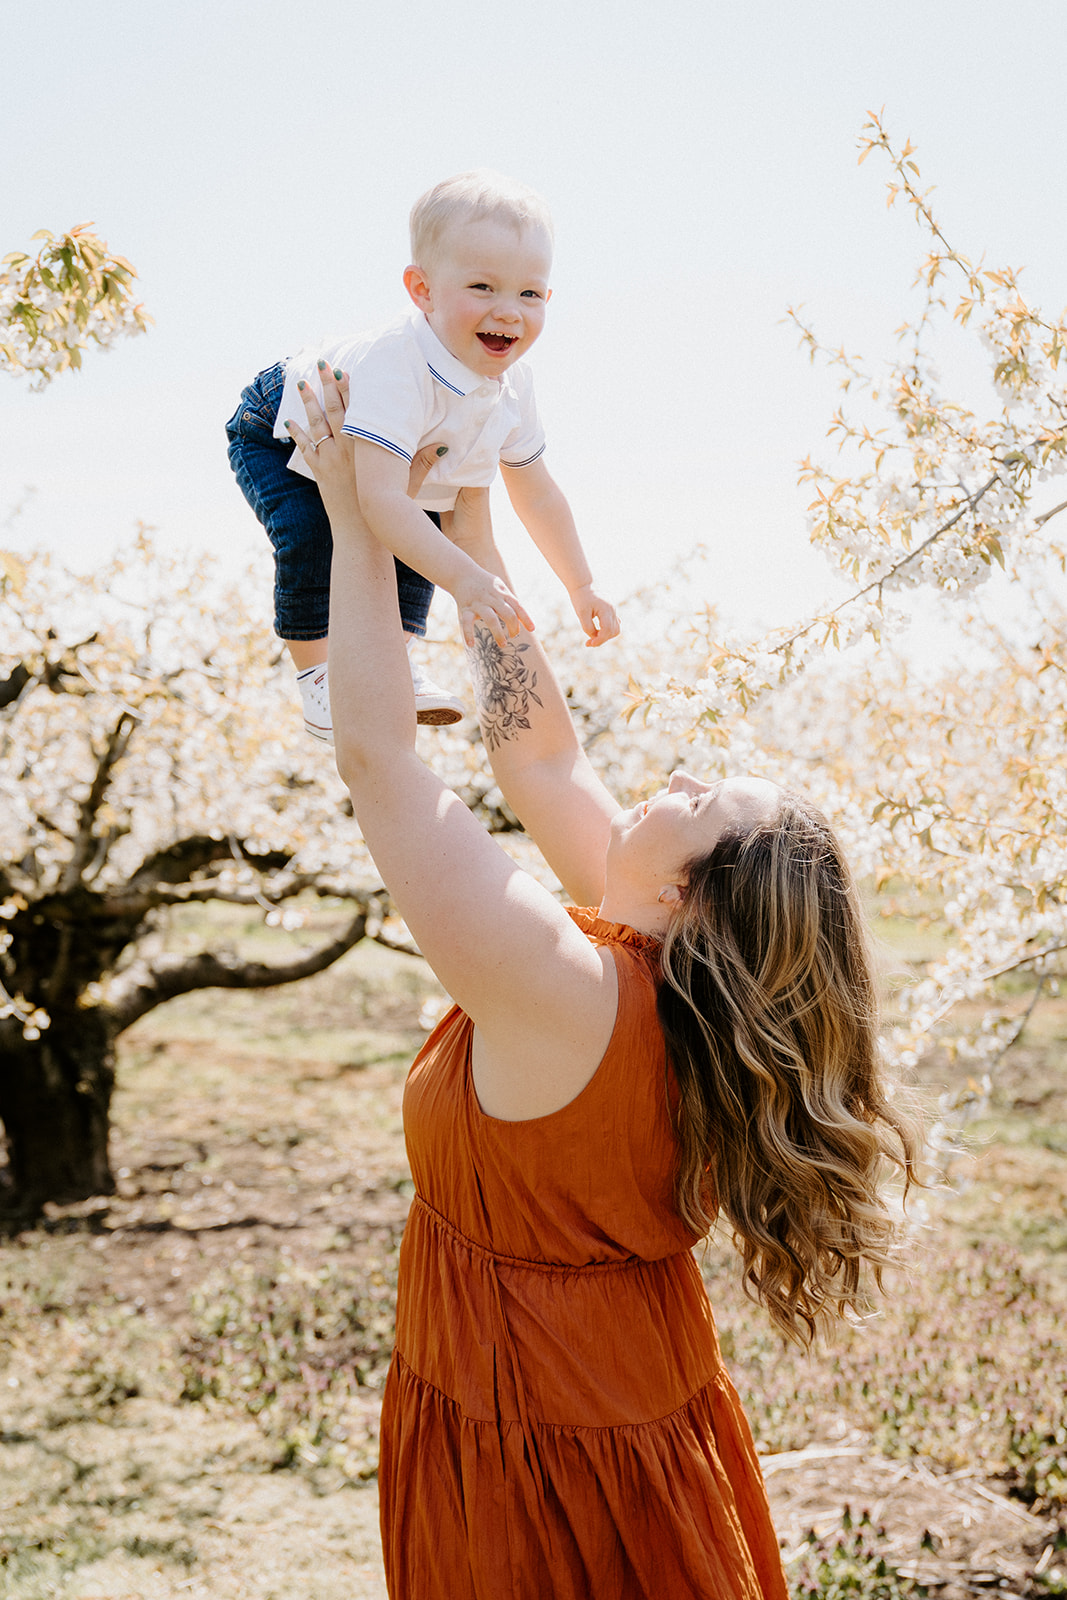 Mom holding toddler up with both arms above her head.